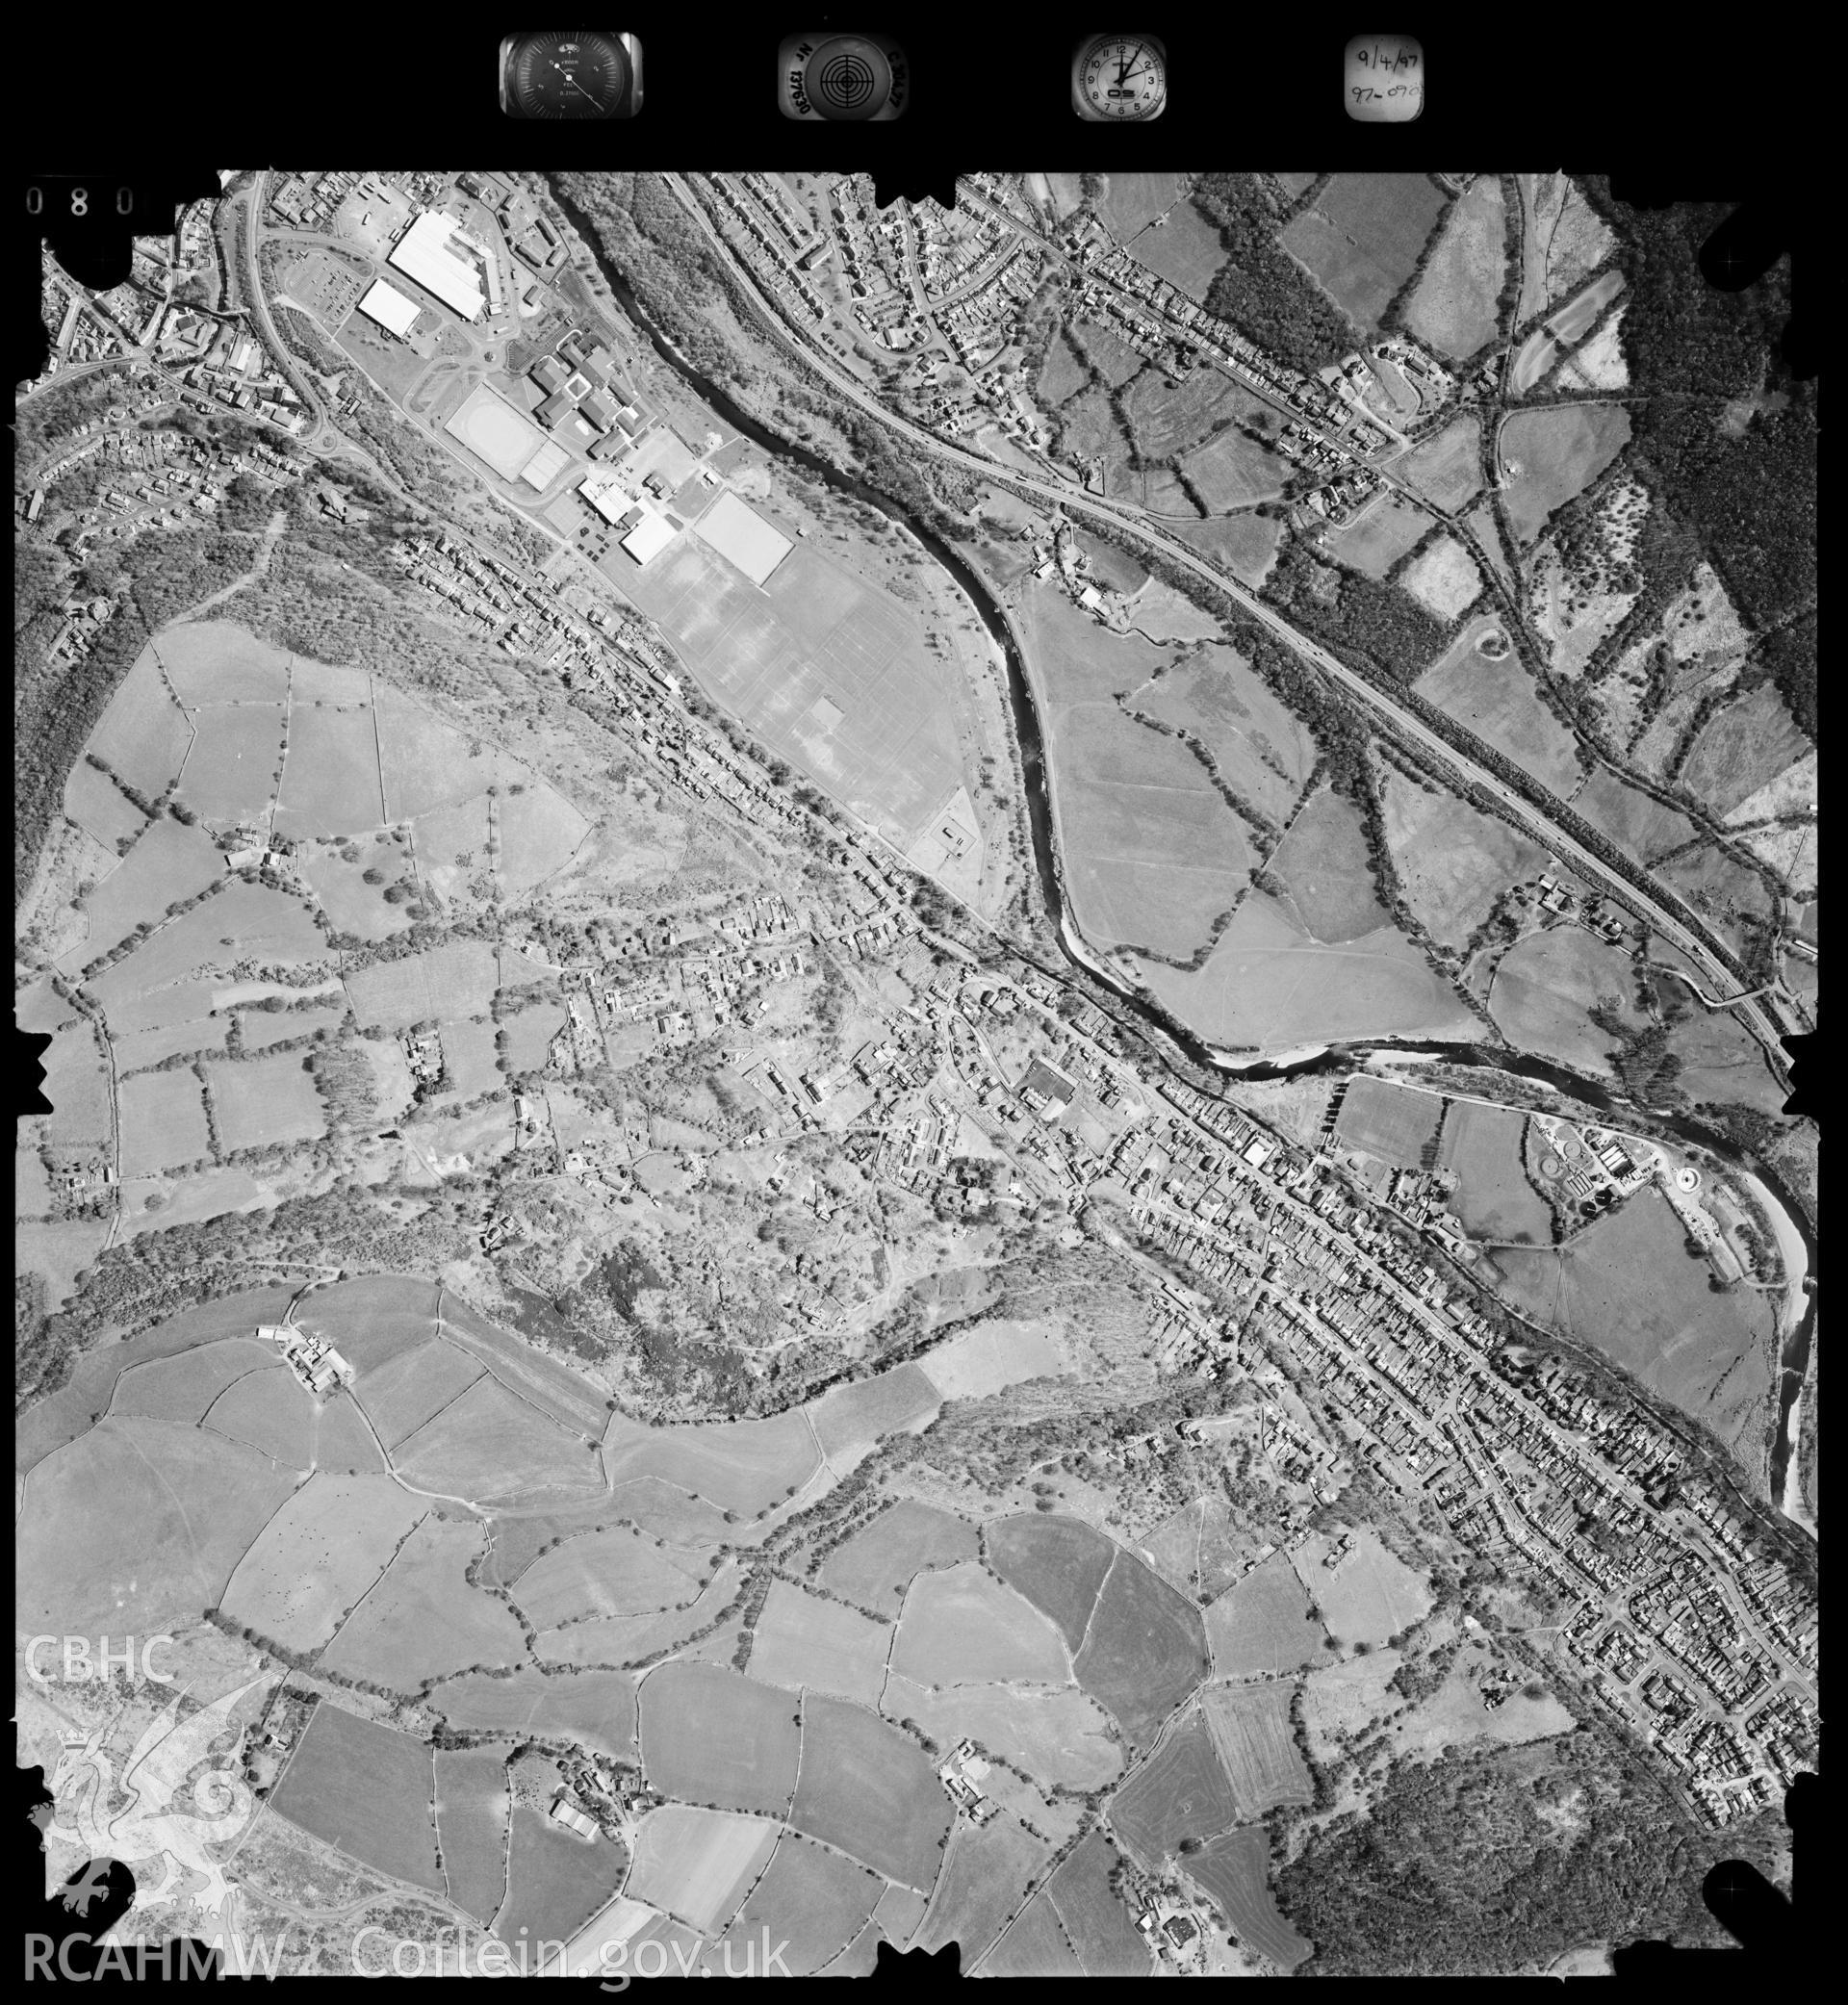 Digitized copy of an aerial photograph showing the Trebanos area, Swansea,  taken by Ordnance Survey, 1997